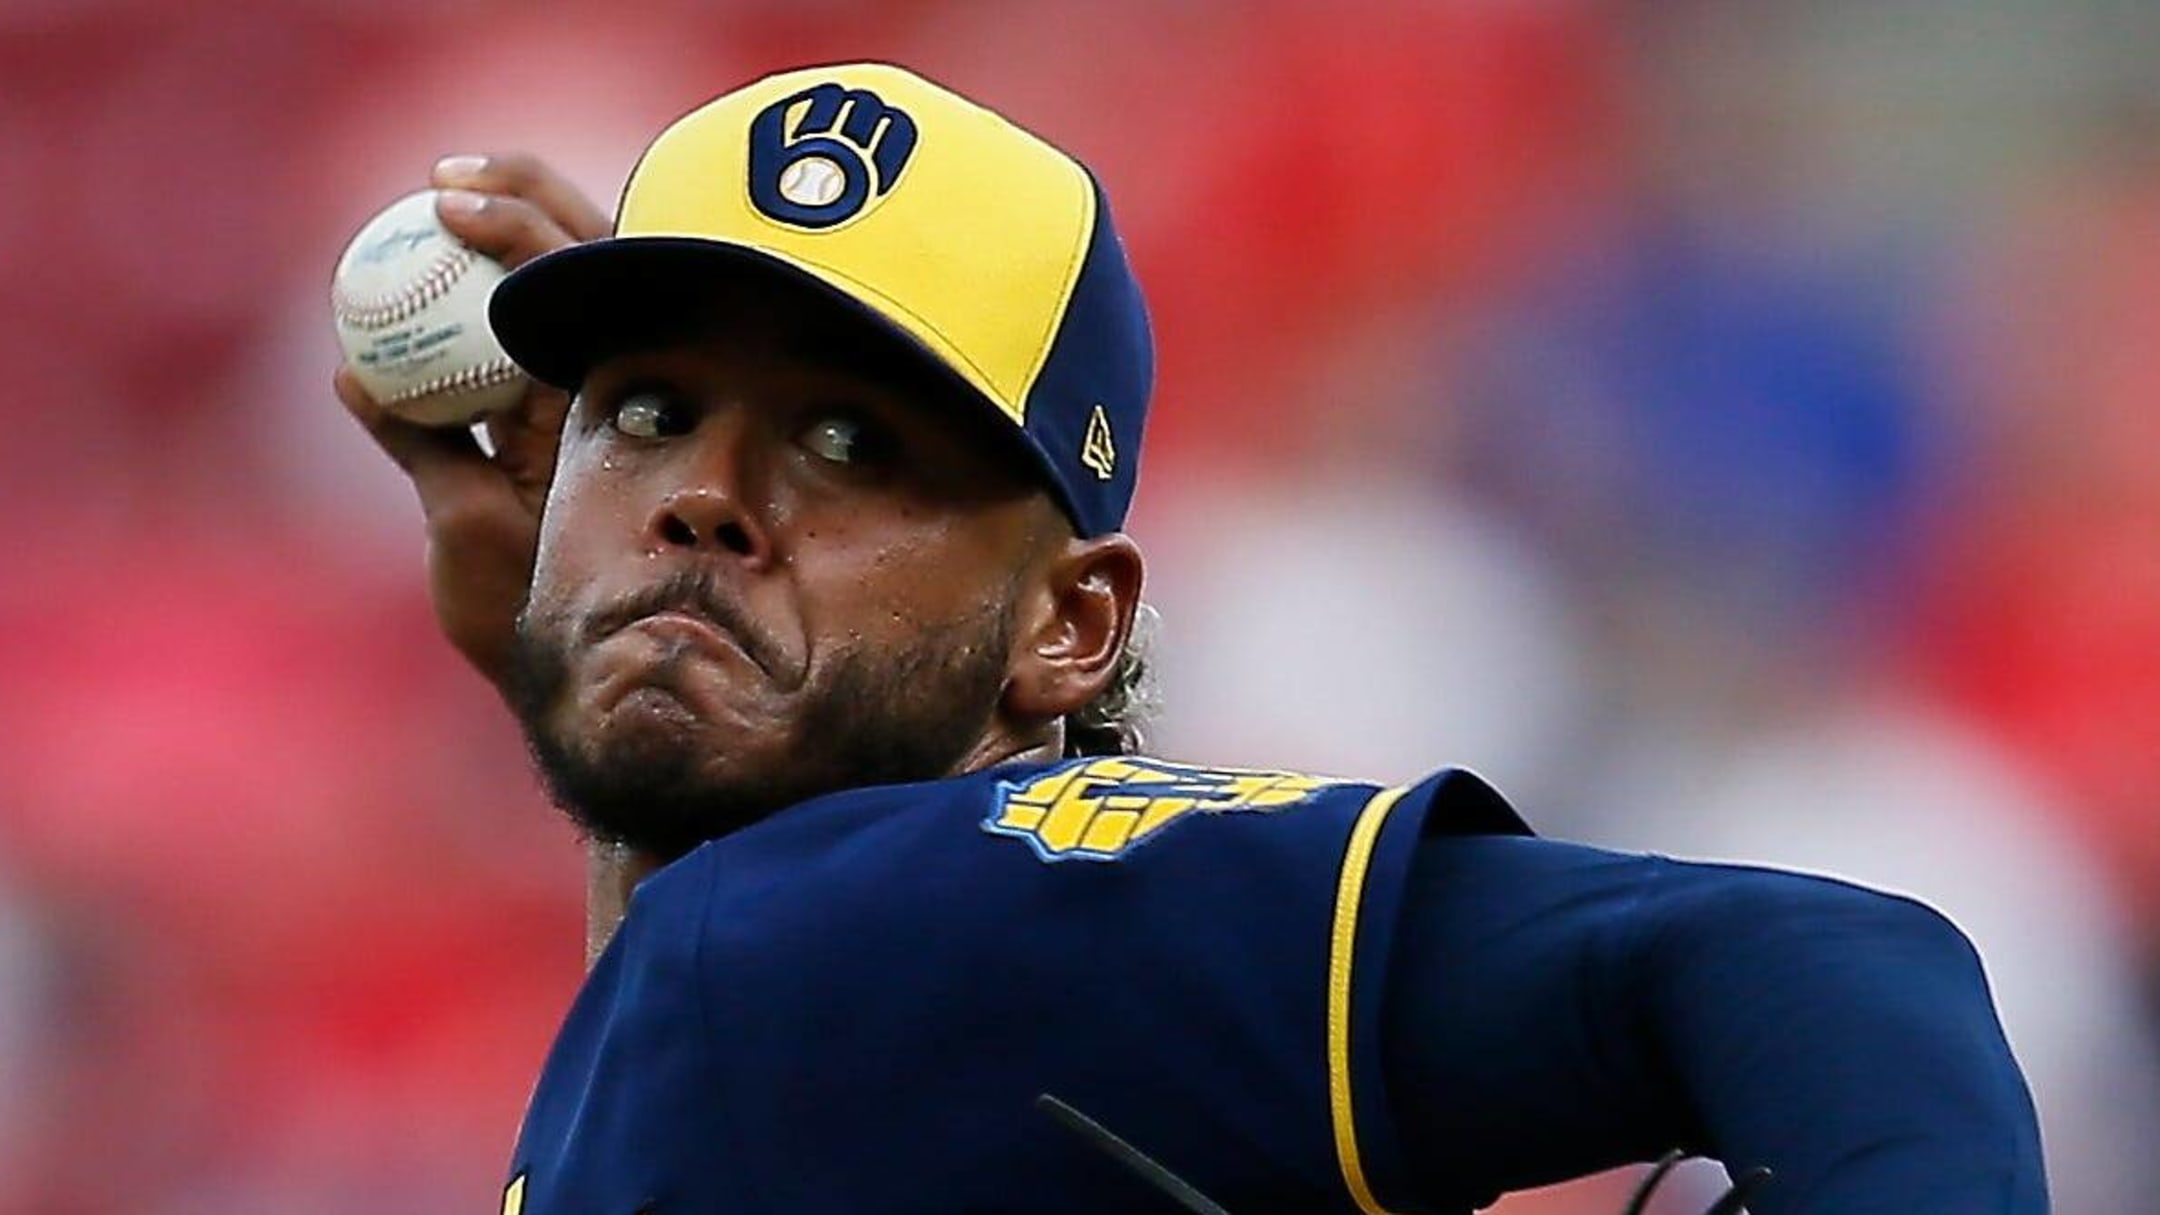 Freddy Peralta gives Brewers another strong outing in win over the